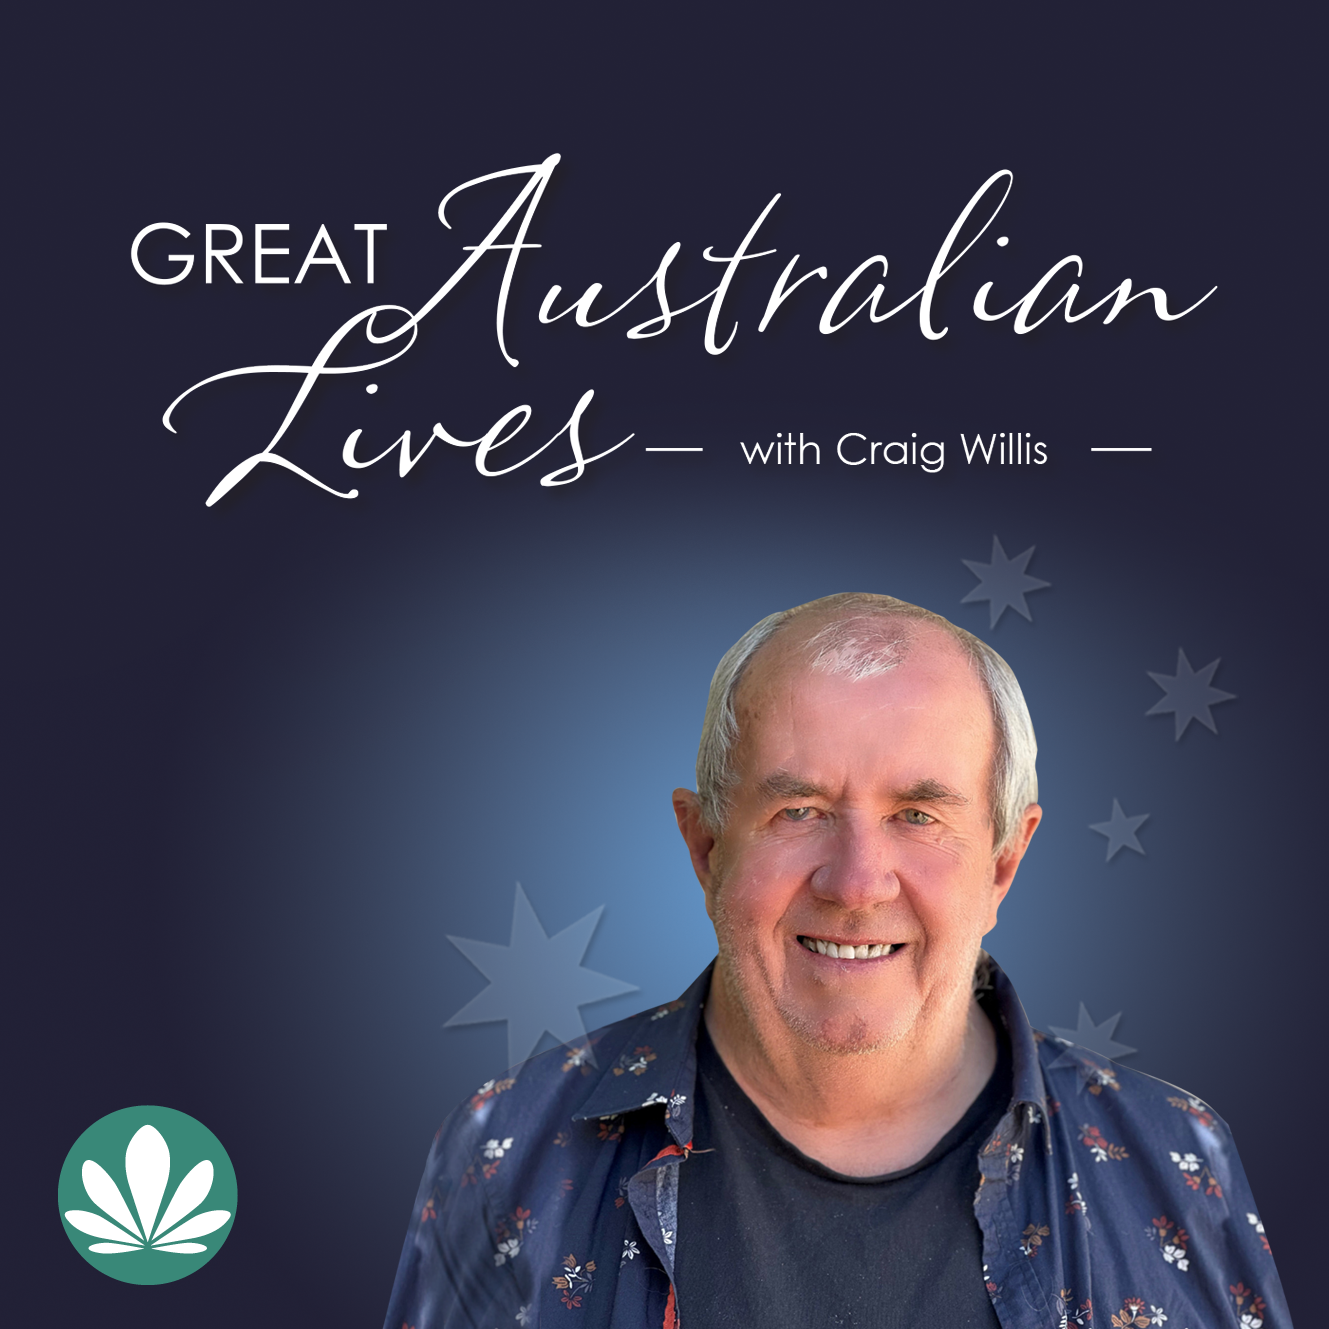 Brian Beers on Great Australian Lives